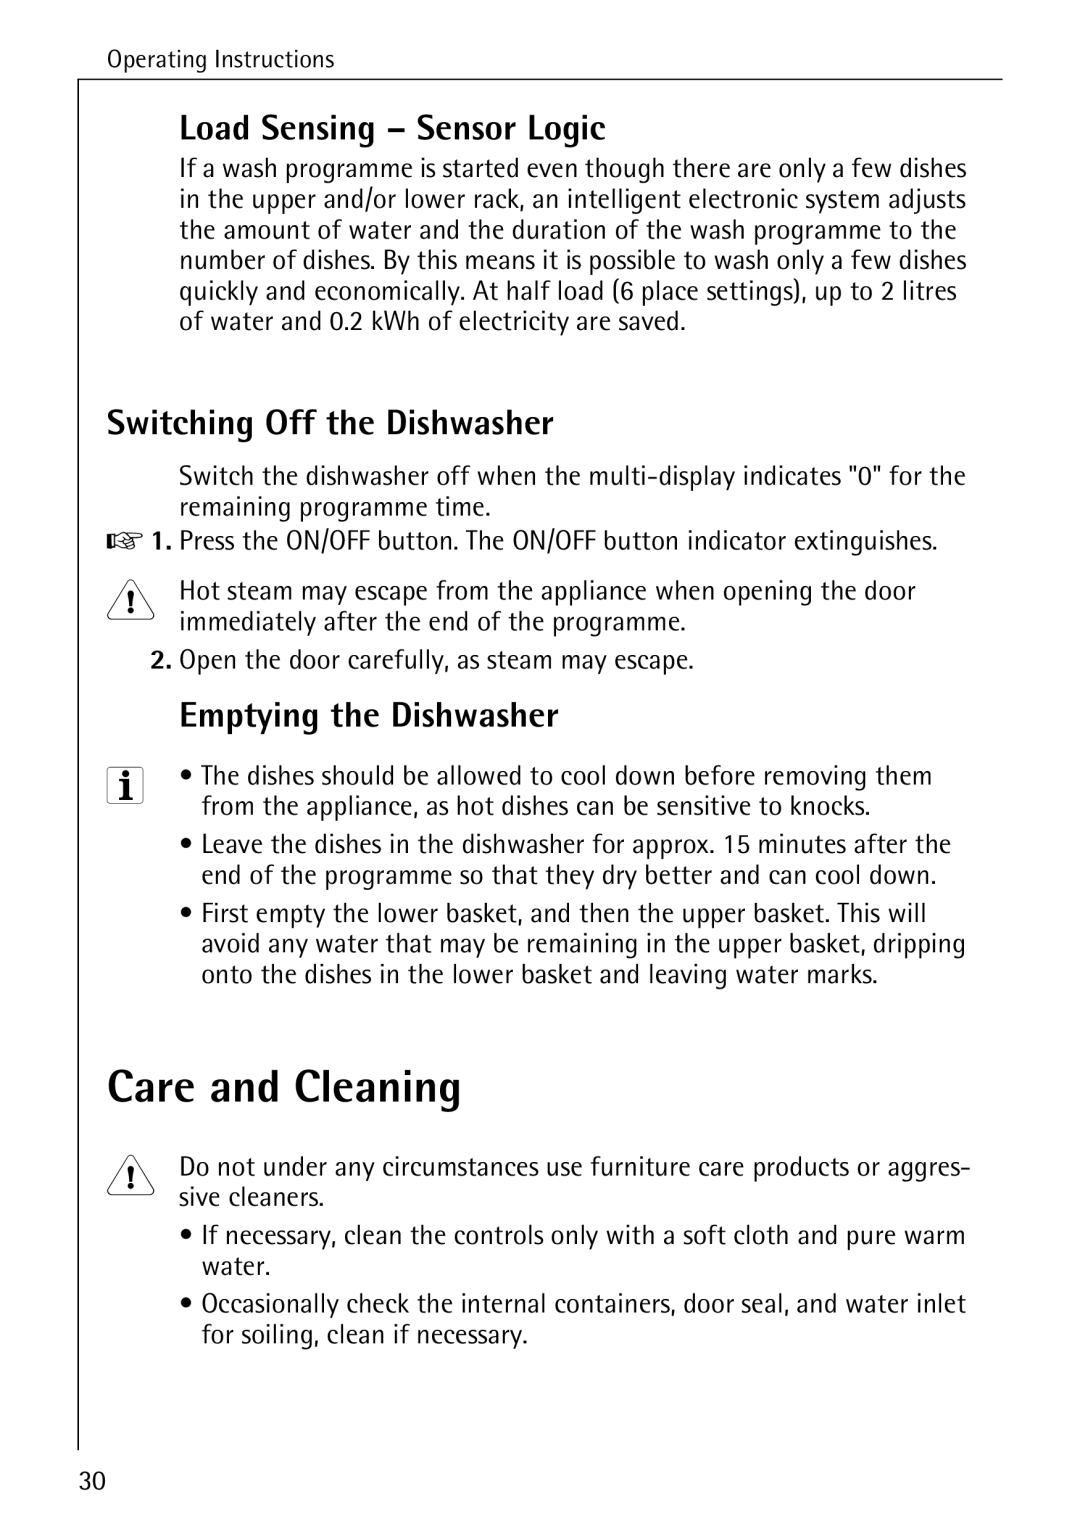 Electrolux FAVORIT 60870 manual Care and Cleaning, Load Sensing Sensor Logic, Switching Off the Dishwasher 